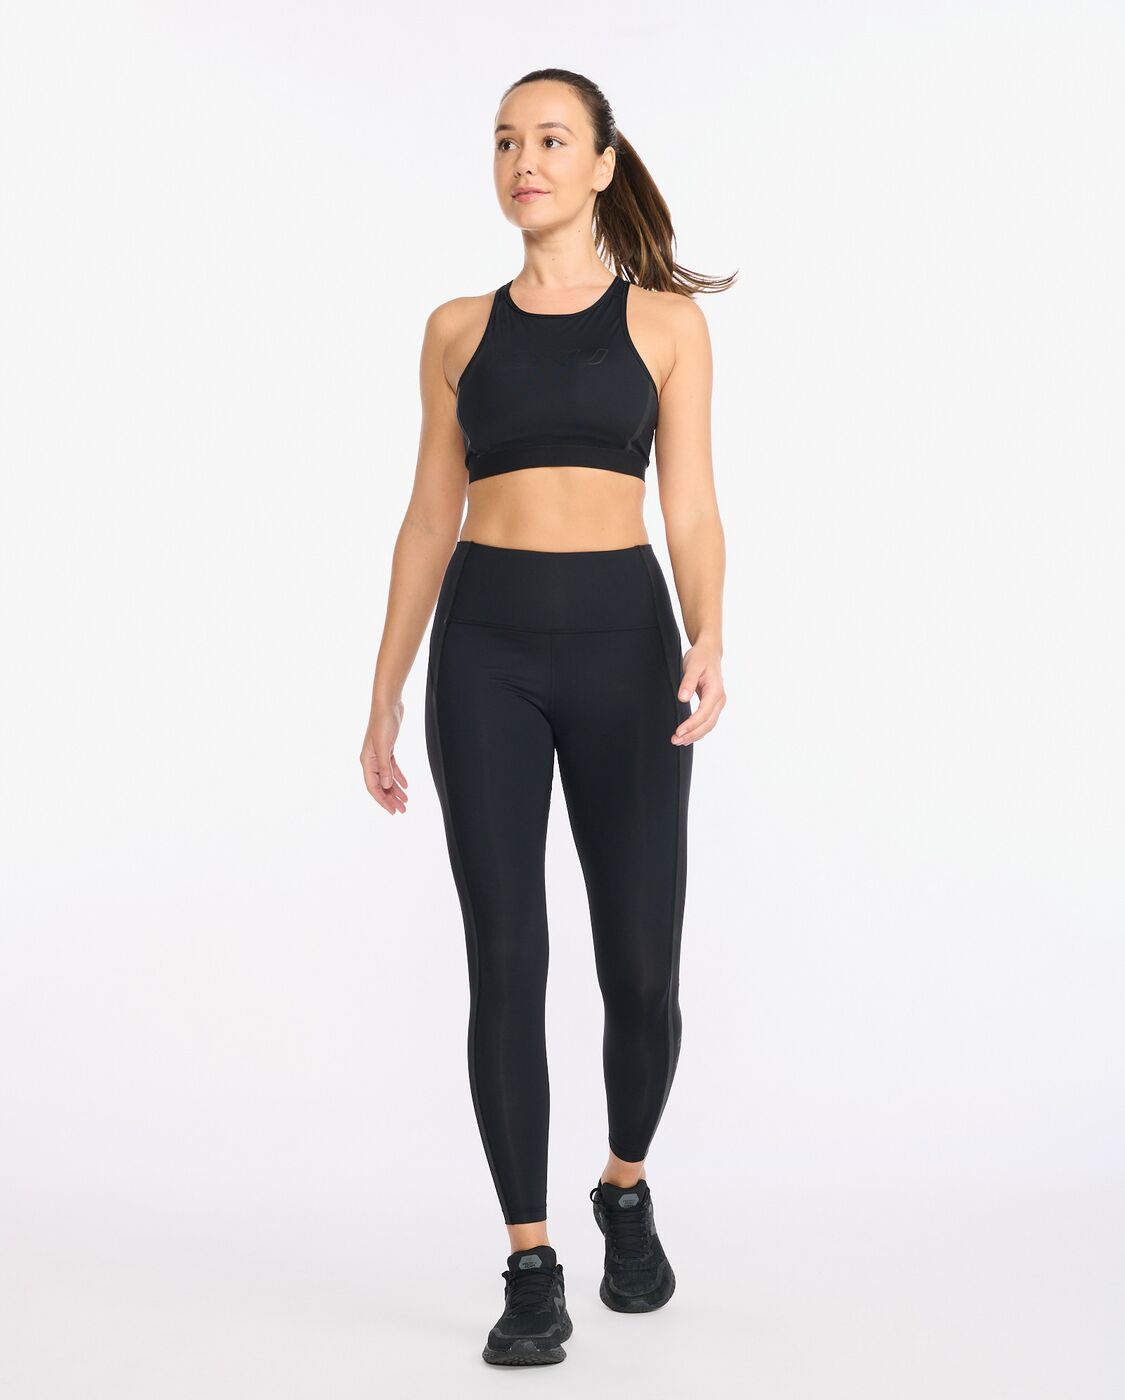 2XU South Africa - Womens Motion Shape Hi-Rise Compression Tights - Black/Nero